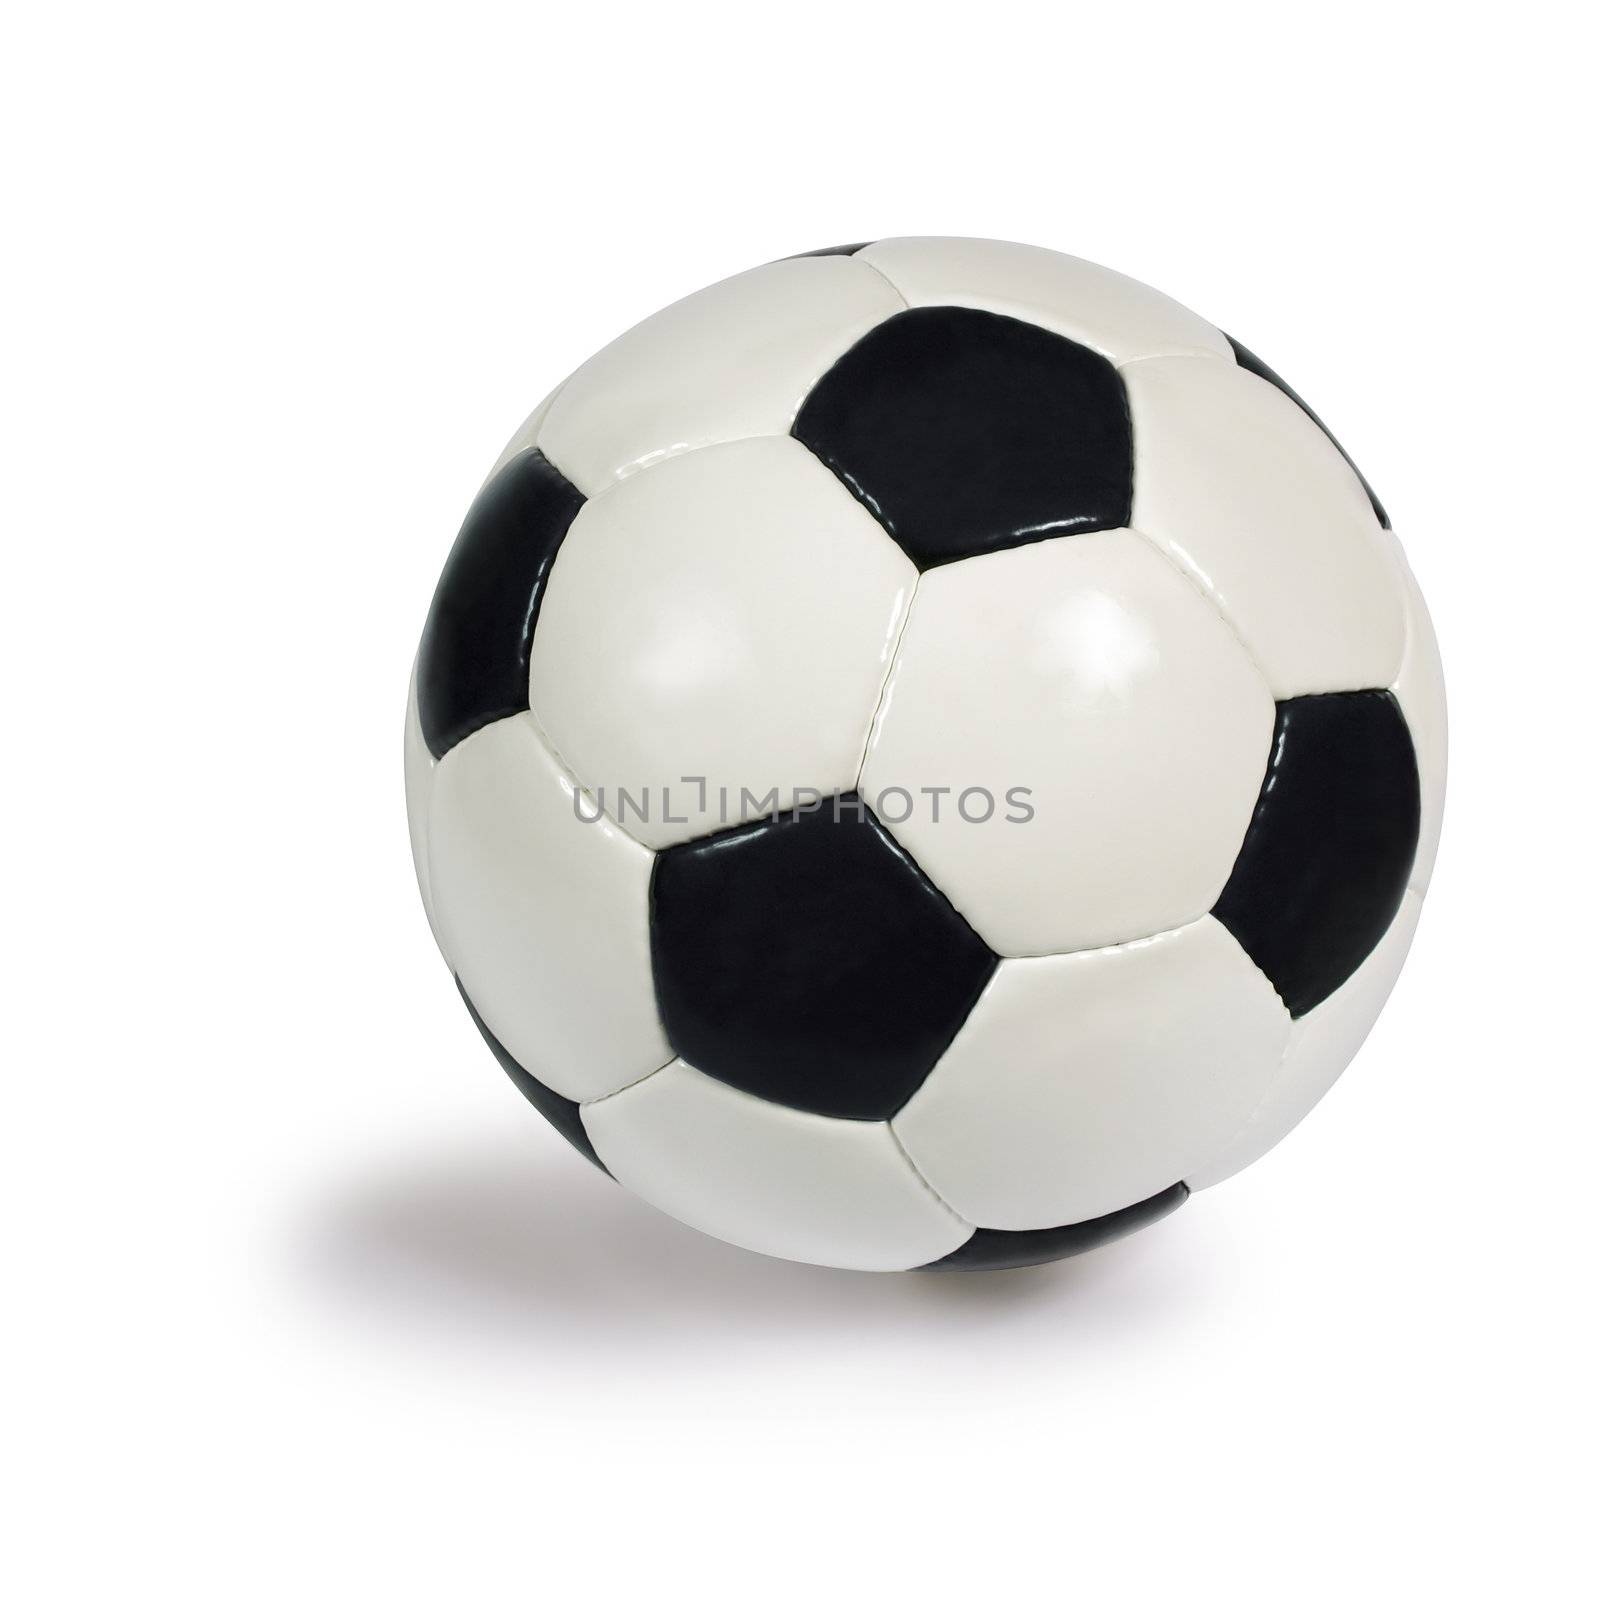 Soccer ball by sumners